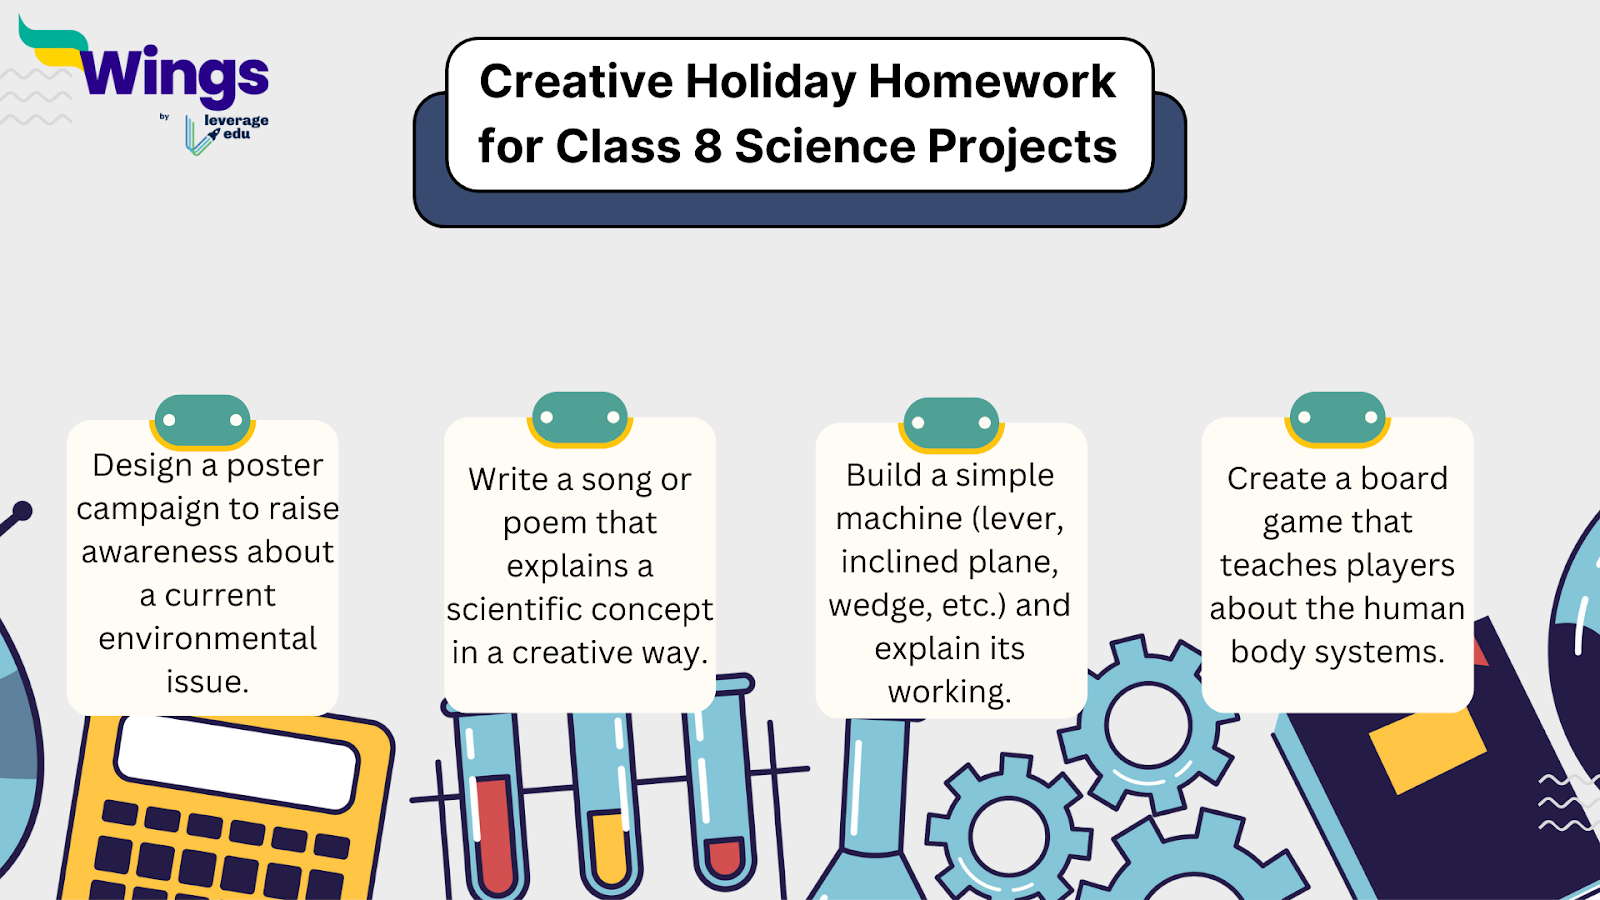 Creative Holiday Homework for Class 8 Science Projects